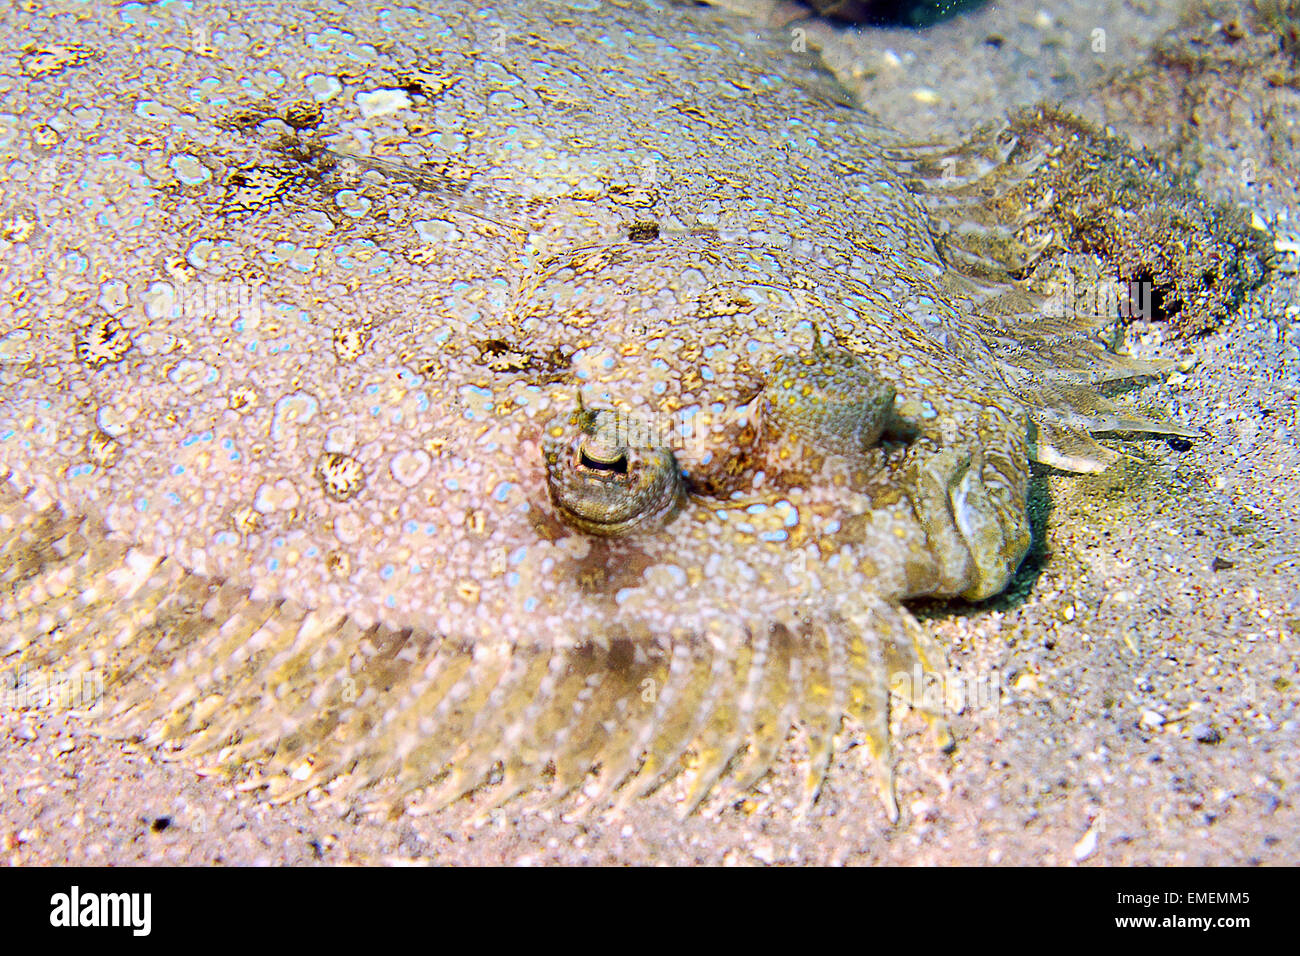 A Peacock flounder camouflaged in the sand. Stock Photo